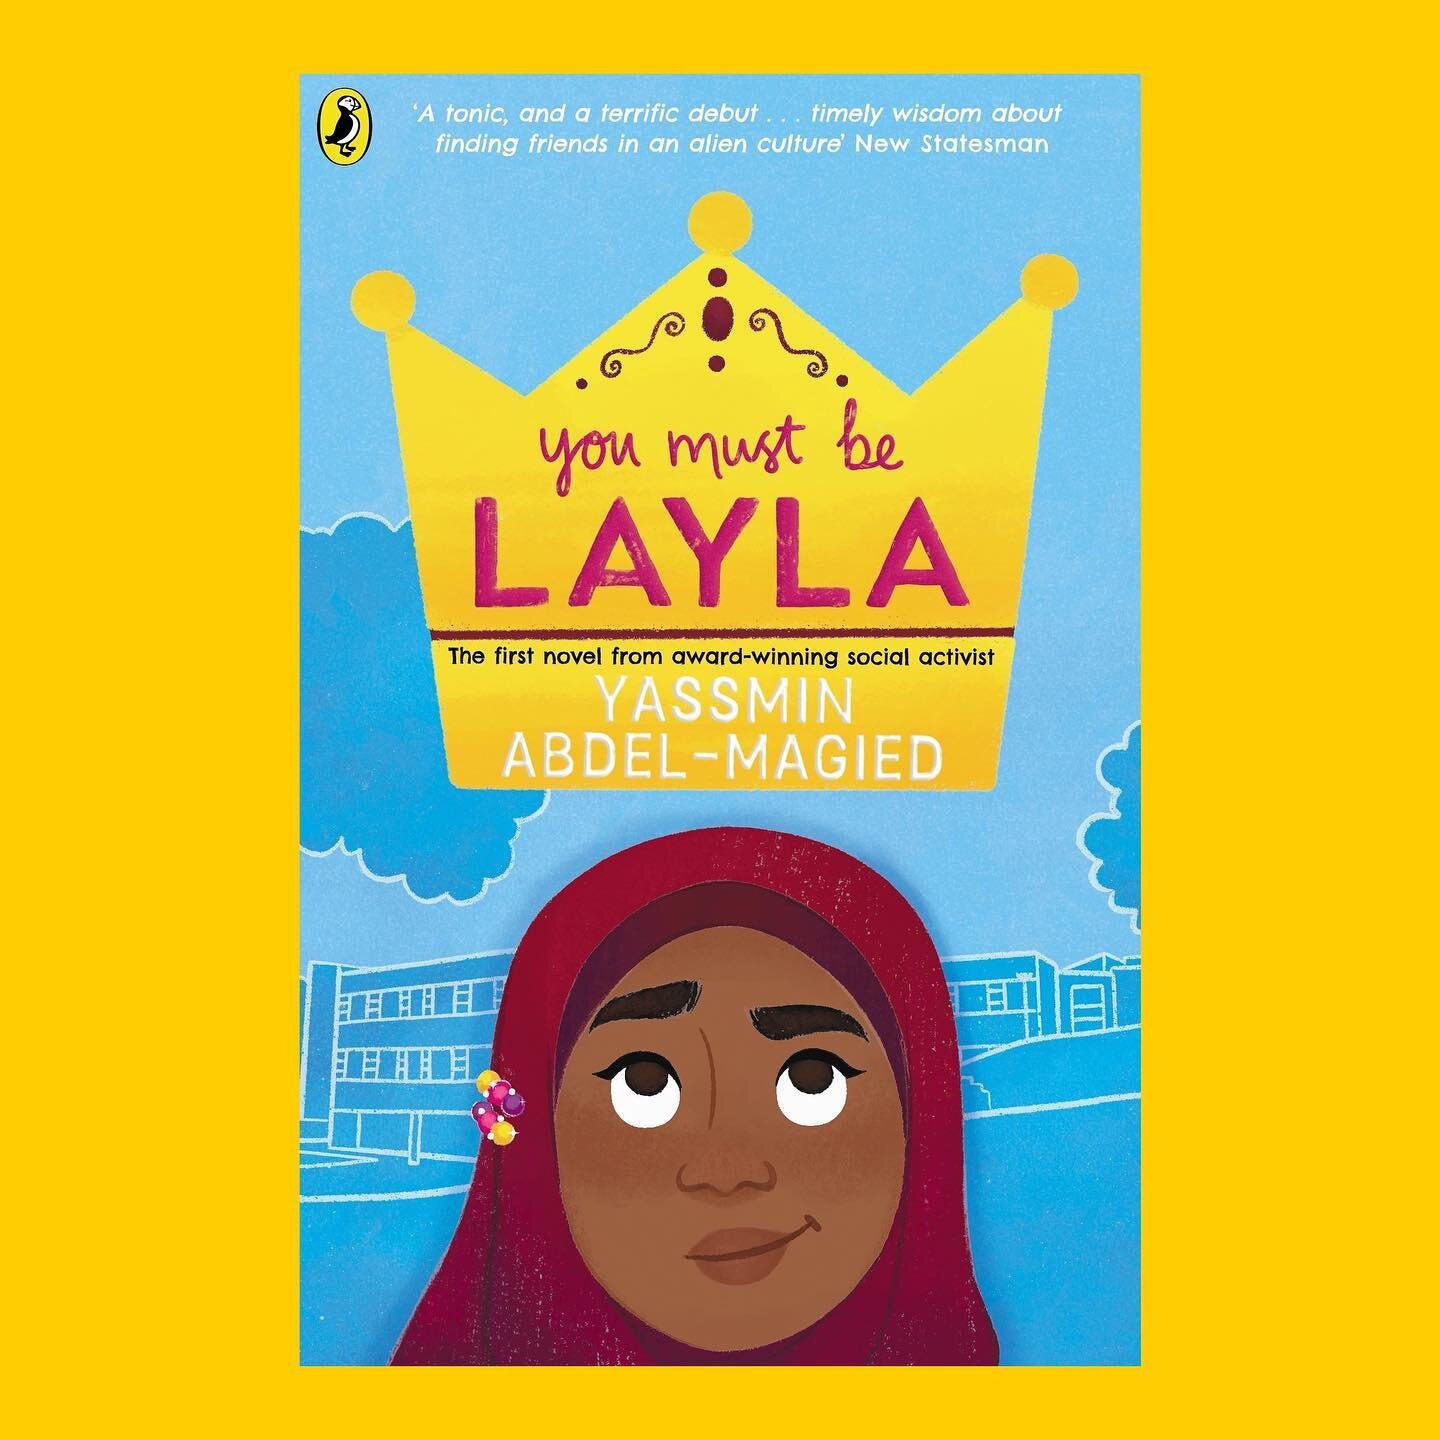 If you buy YOU MUST BE LAYLA in the U.K. from TODAT, you get a copy of this gorgeous new cover 😍😍😍😍 and while you&rsquo;re at it, why not pre-order a copy of LISTEN LAYLA, too, out in July!!
⭐️
And if you see a copy on a bookshelf please take a p